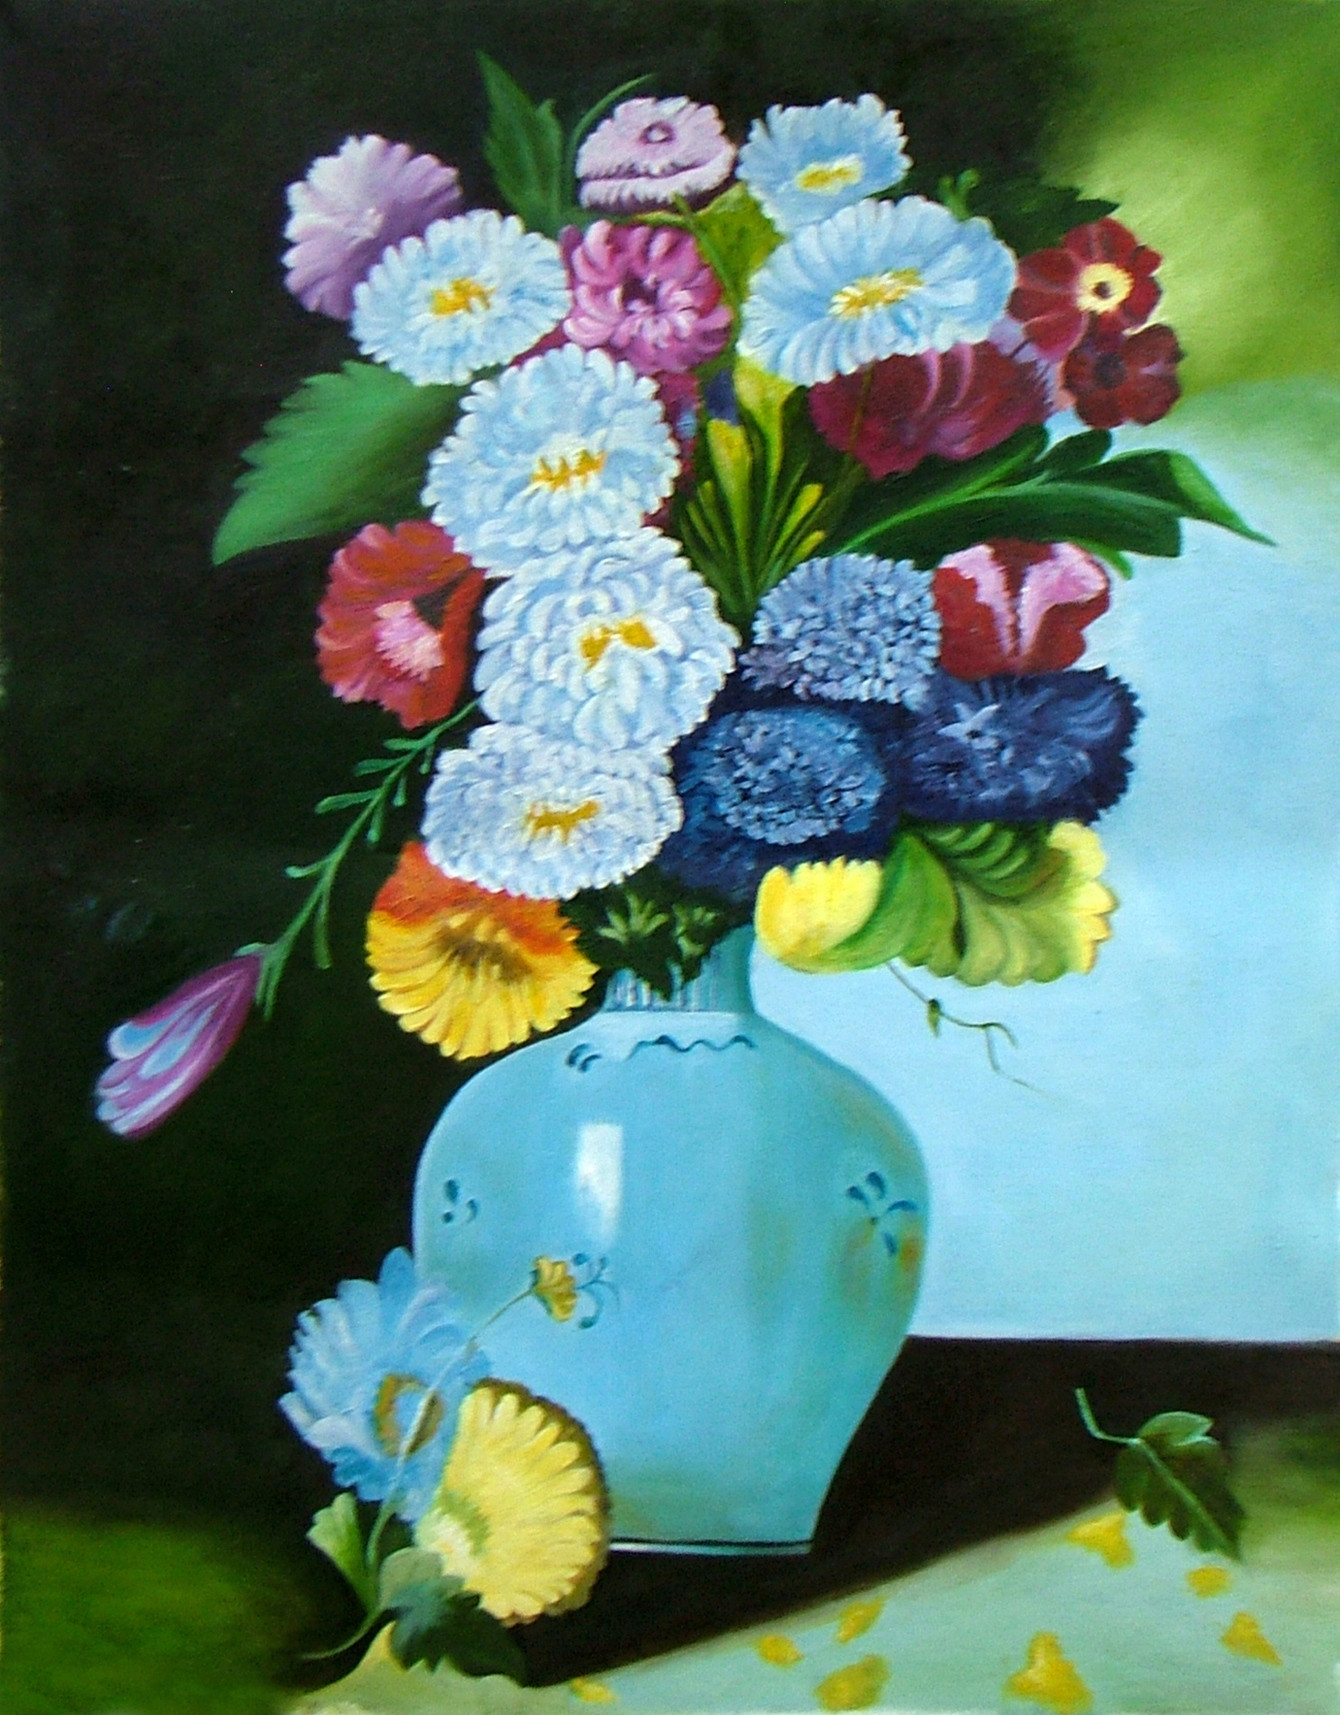 16 attractive Still Life Vase Of Flowers 2024 free download still life vase of flowers of 25 luxury flower vase painting watercolor flower decoration ideas for flower vase painting watercolor lovely floral galaxy oil painting 2015 by neeraj parswal